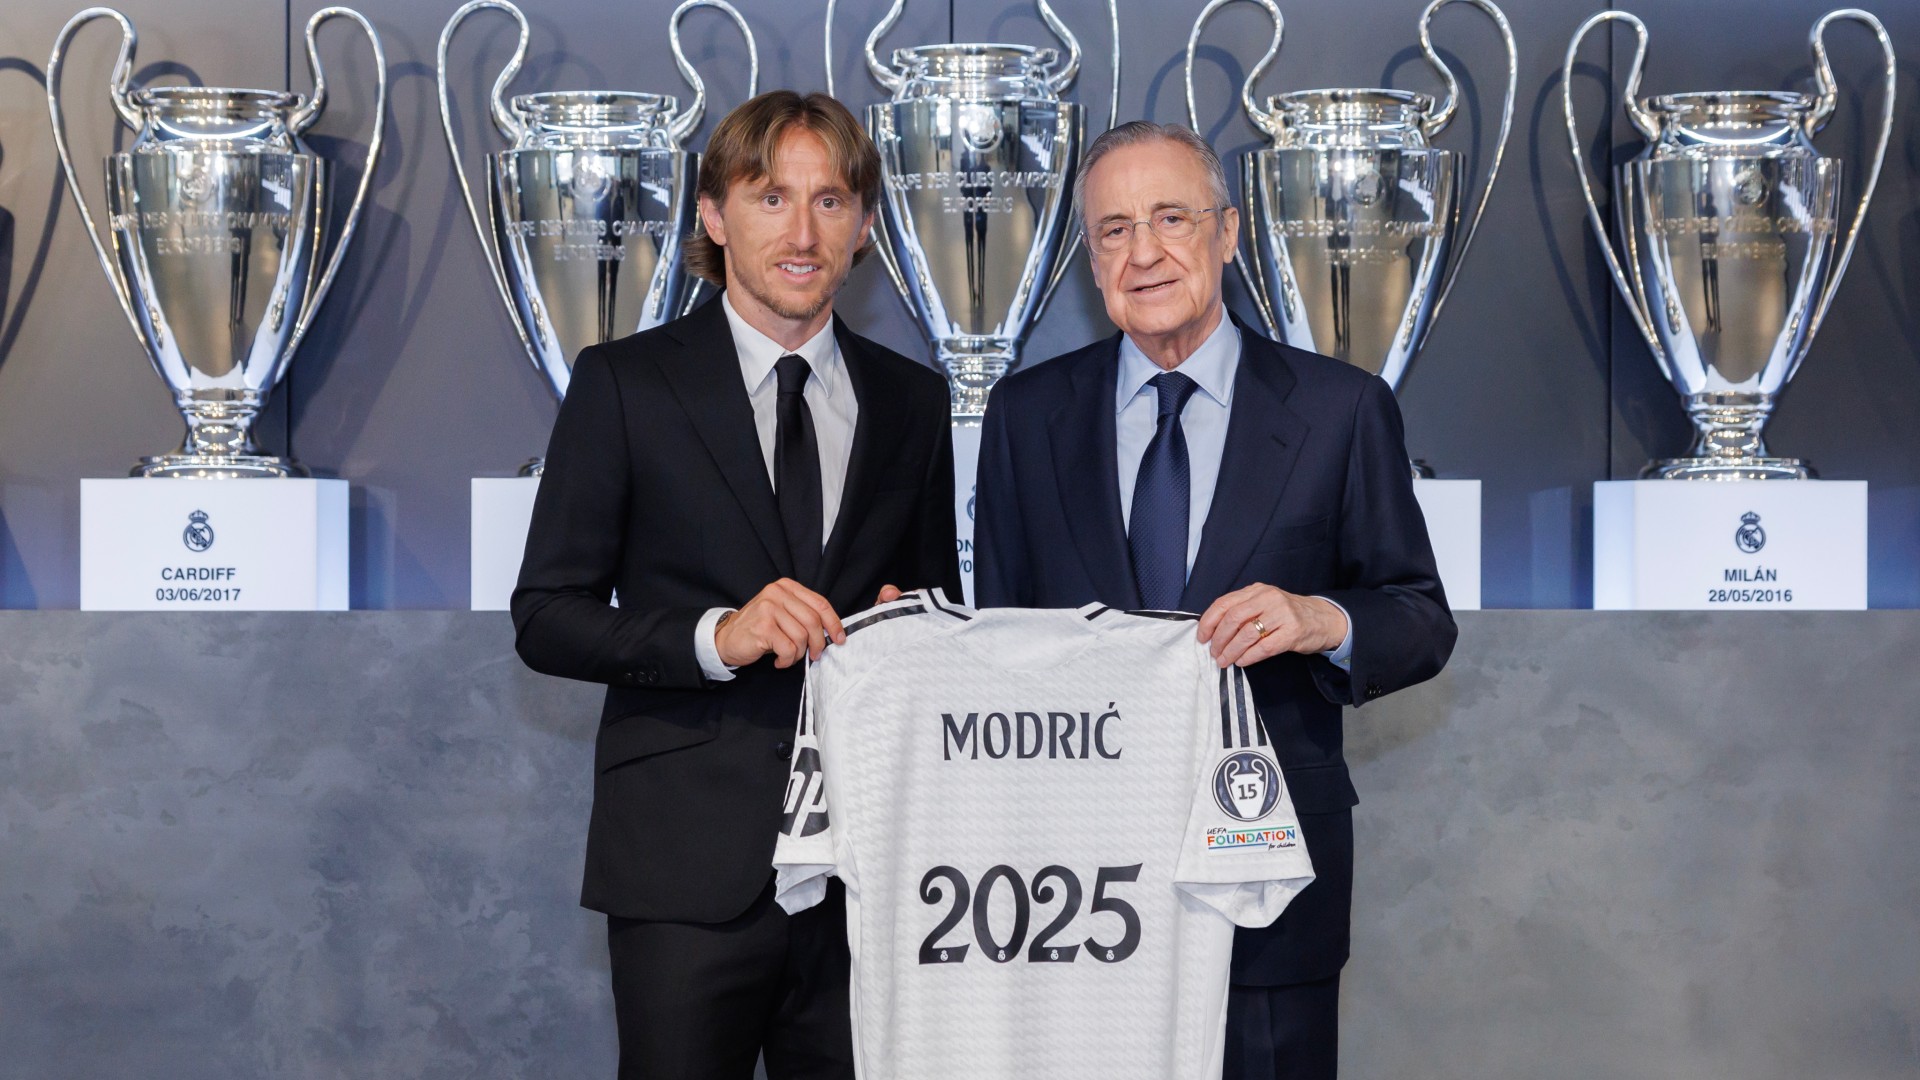 Modric signs contract extension